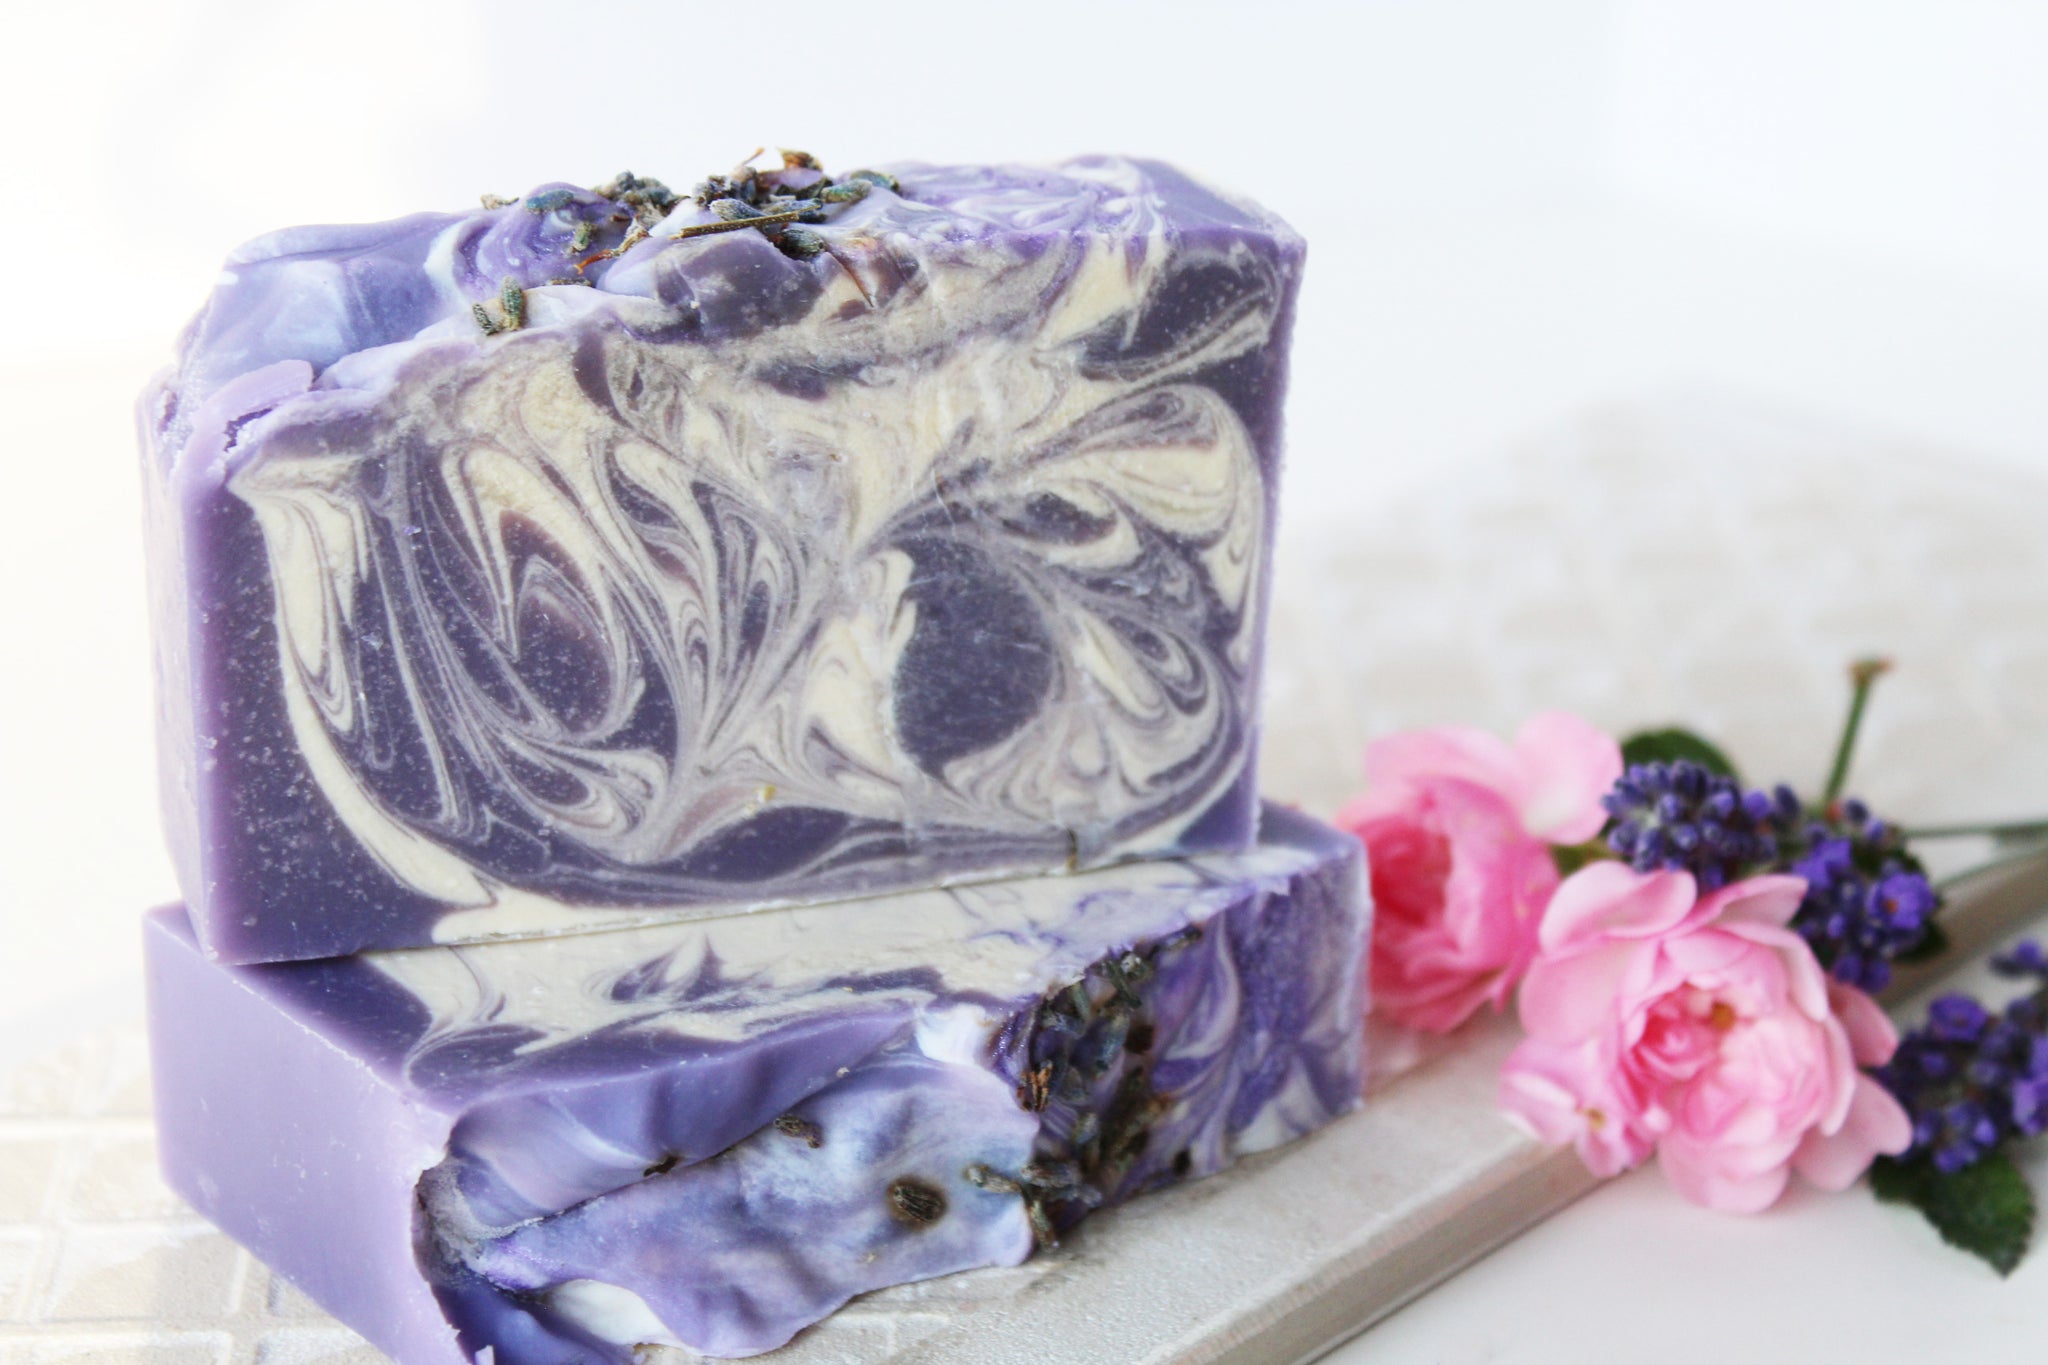 Lavender goat milk soap made naturally by Vermont Lavender LLC